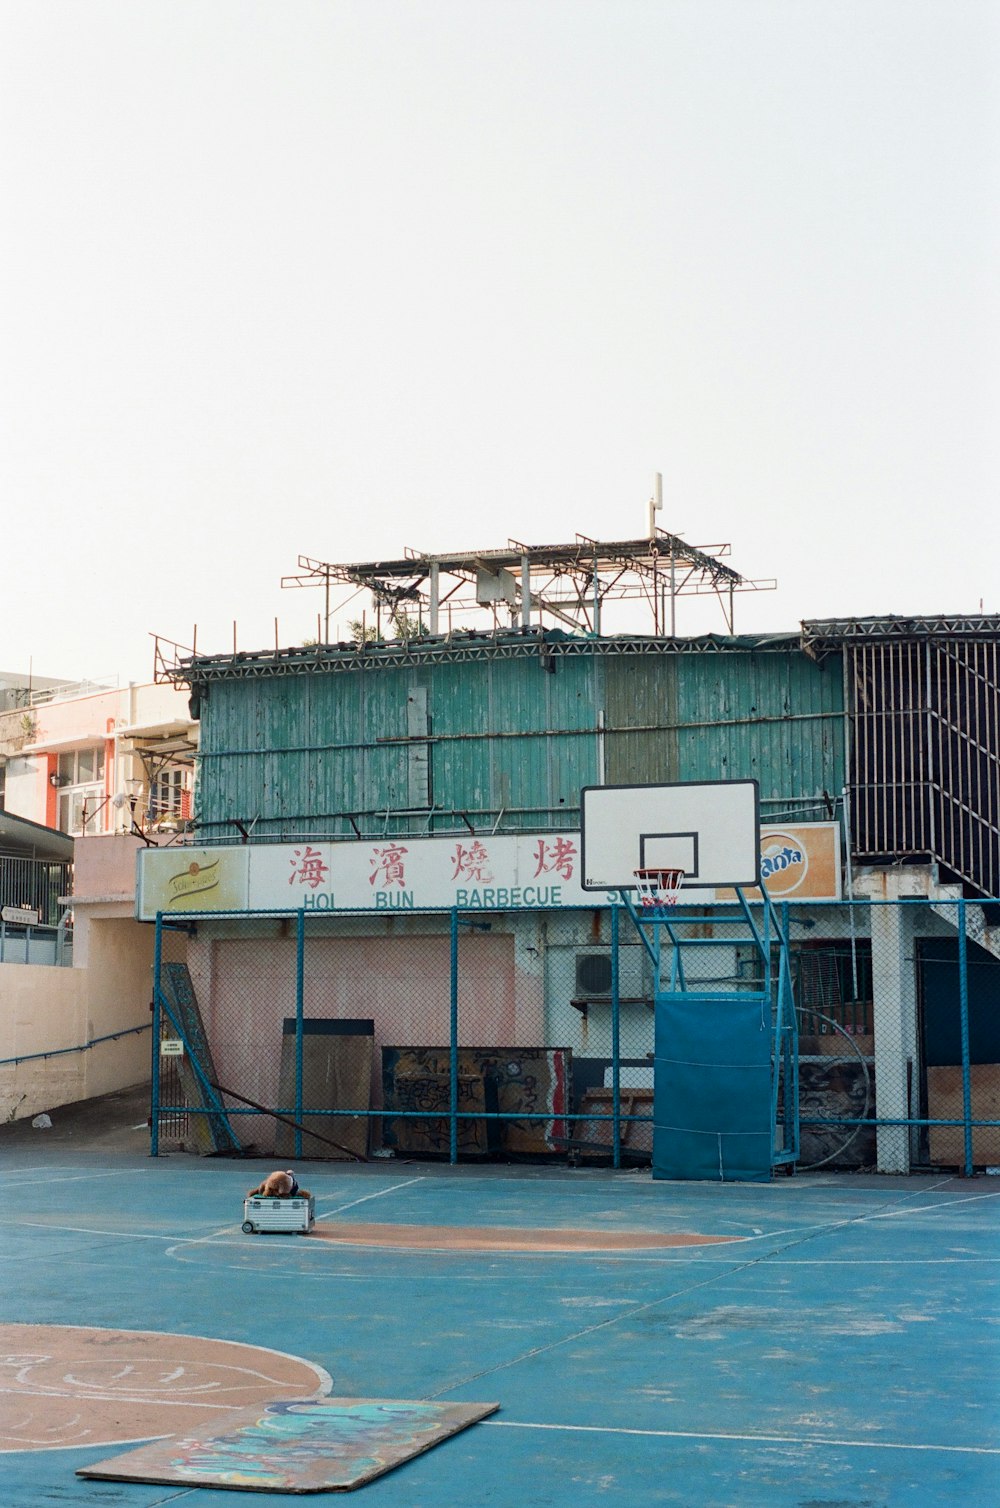 a basketball court in front of a building